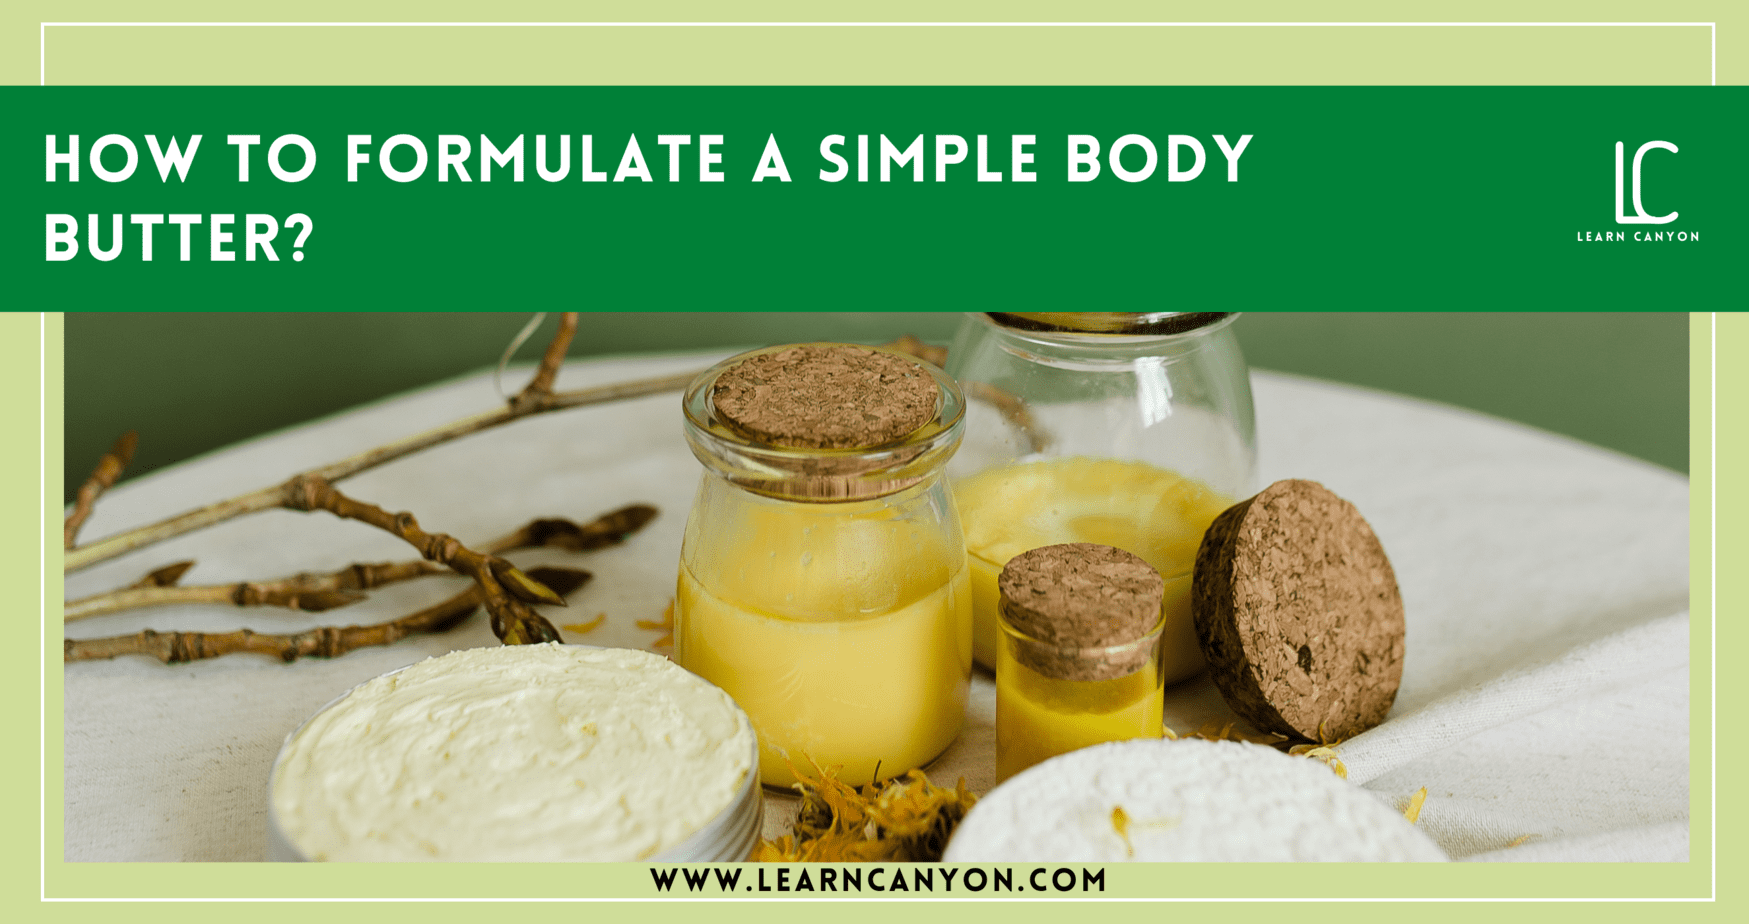 How To Formulate A Simple Body Butter?